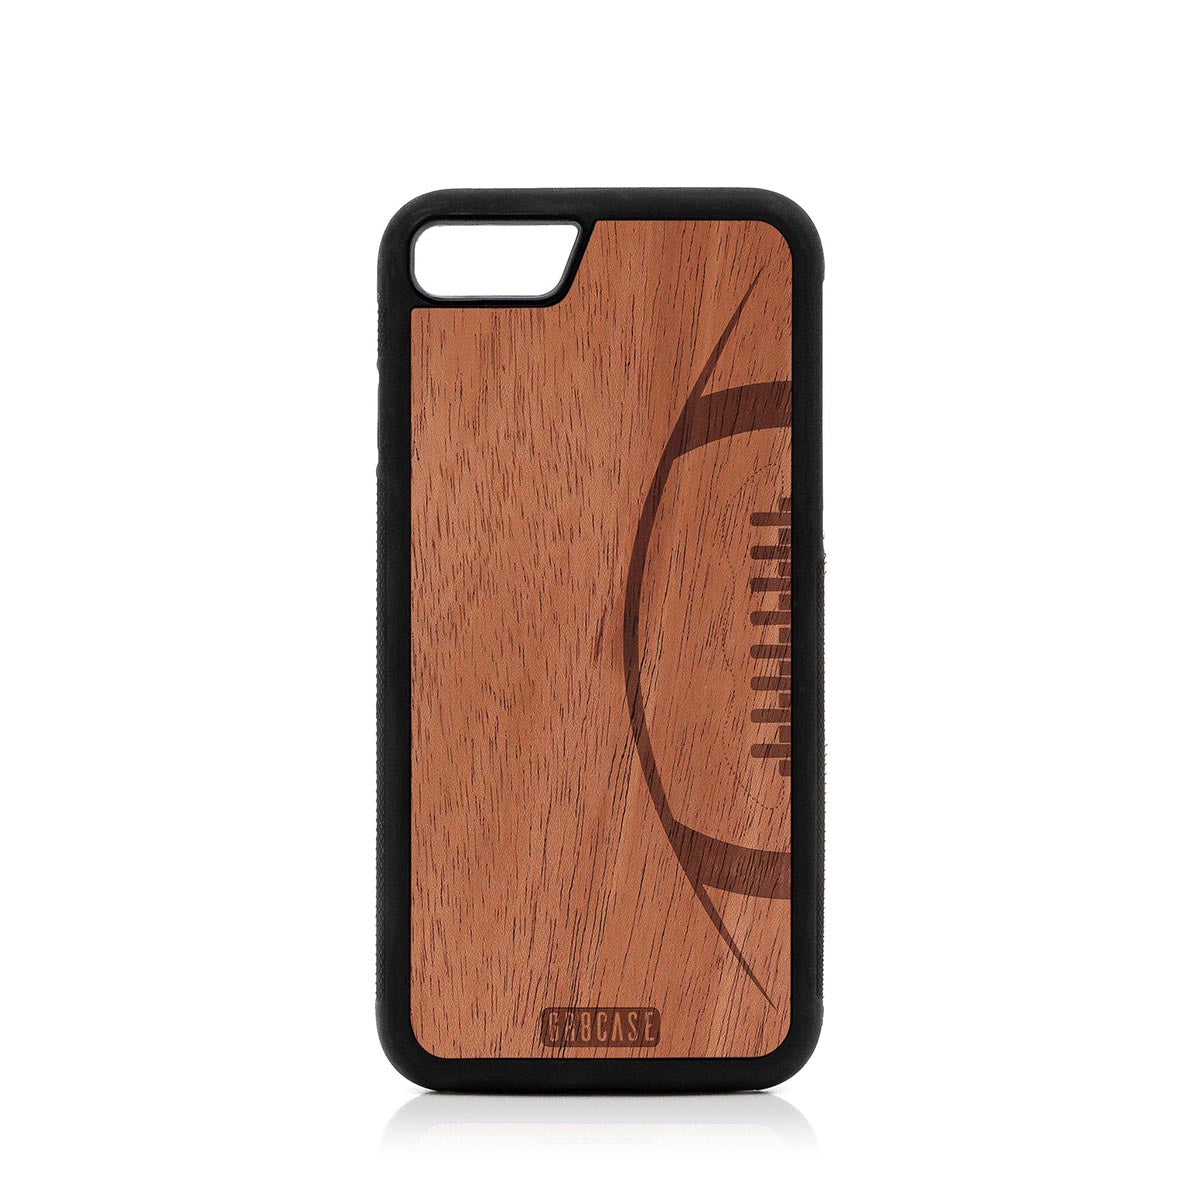 Football Design Wood Case For iPhone 7/8 by GR8CASE